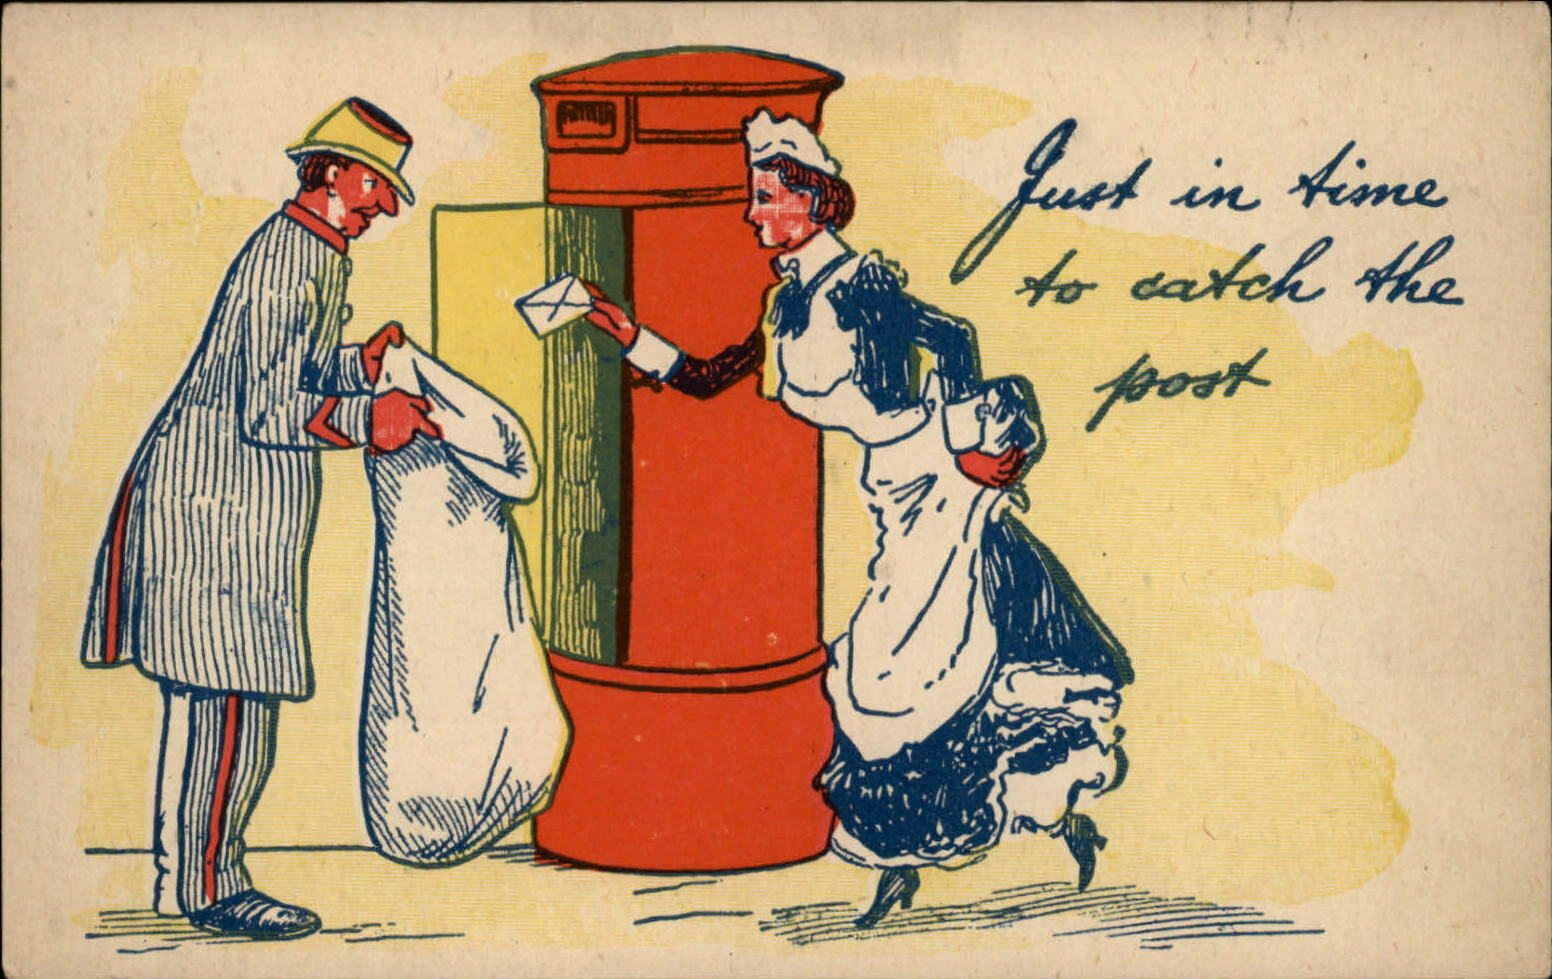 Comic Pun Lady Runs To Mail Letter To Catch The Post ~ C1910 Vintage Postcard